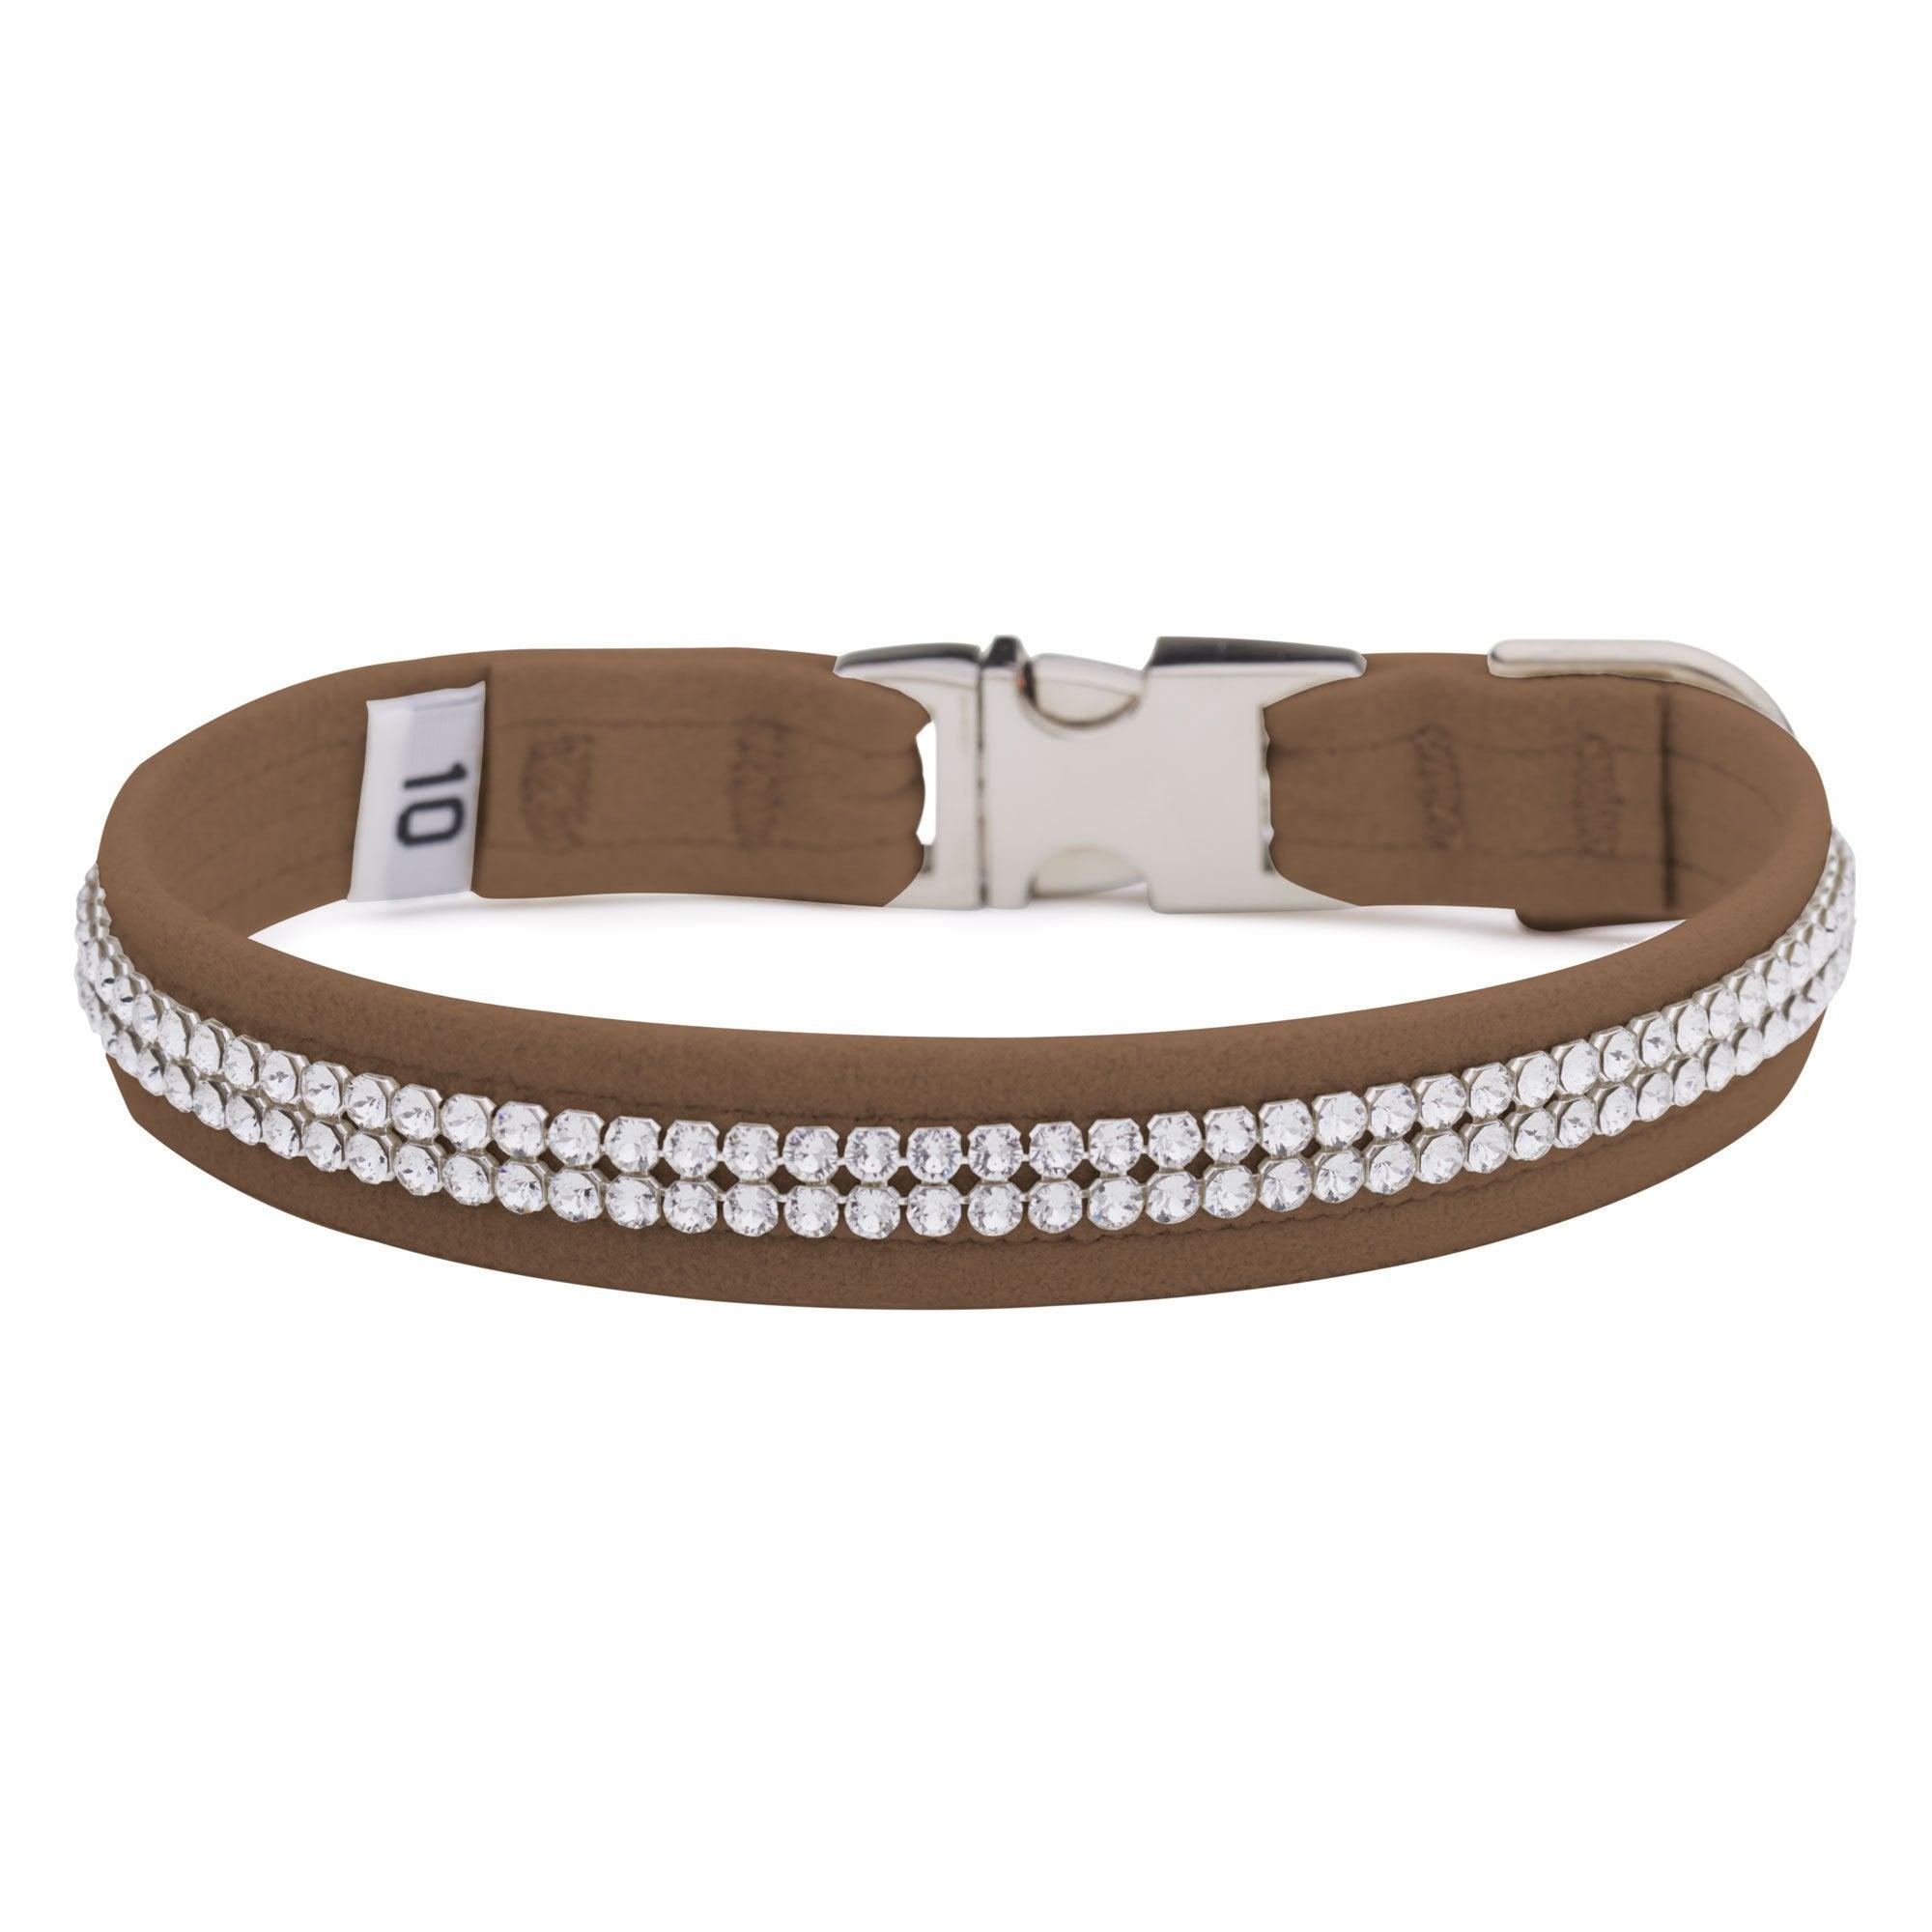 Fawn 2 Row Giltmore Perfect Fit Collar - Rocky & Maggie's Pet Boutique and Salon